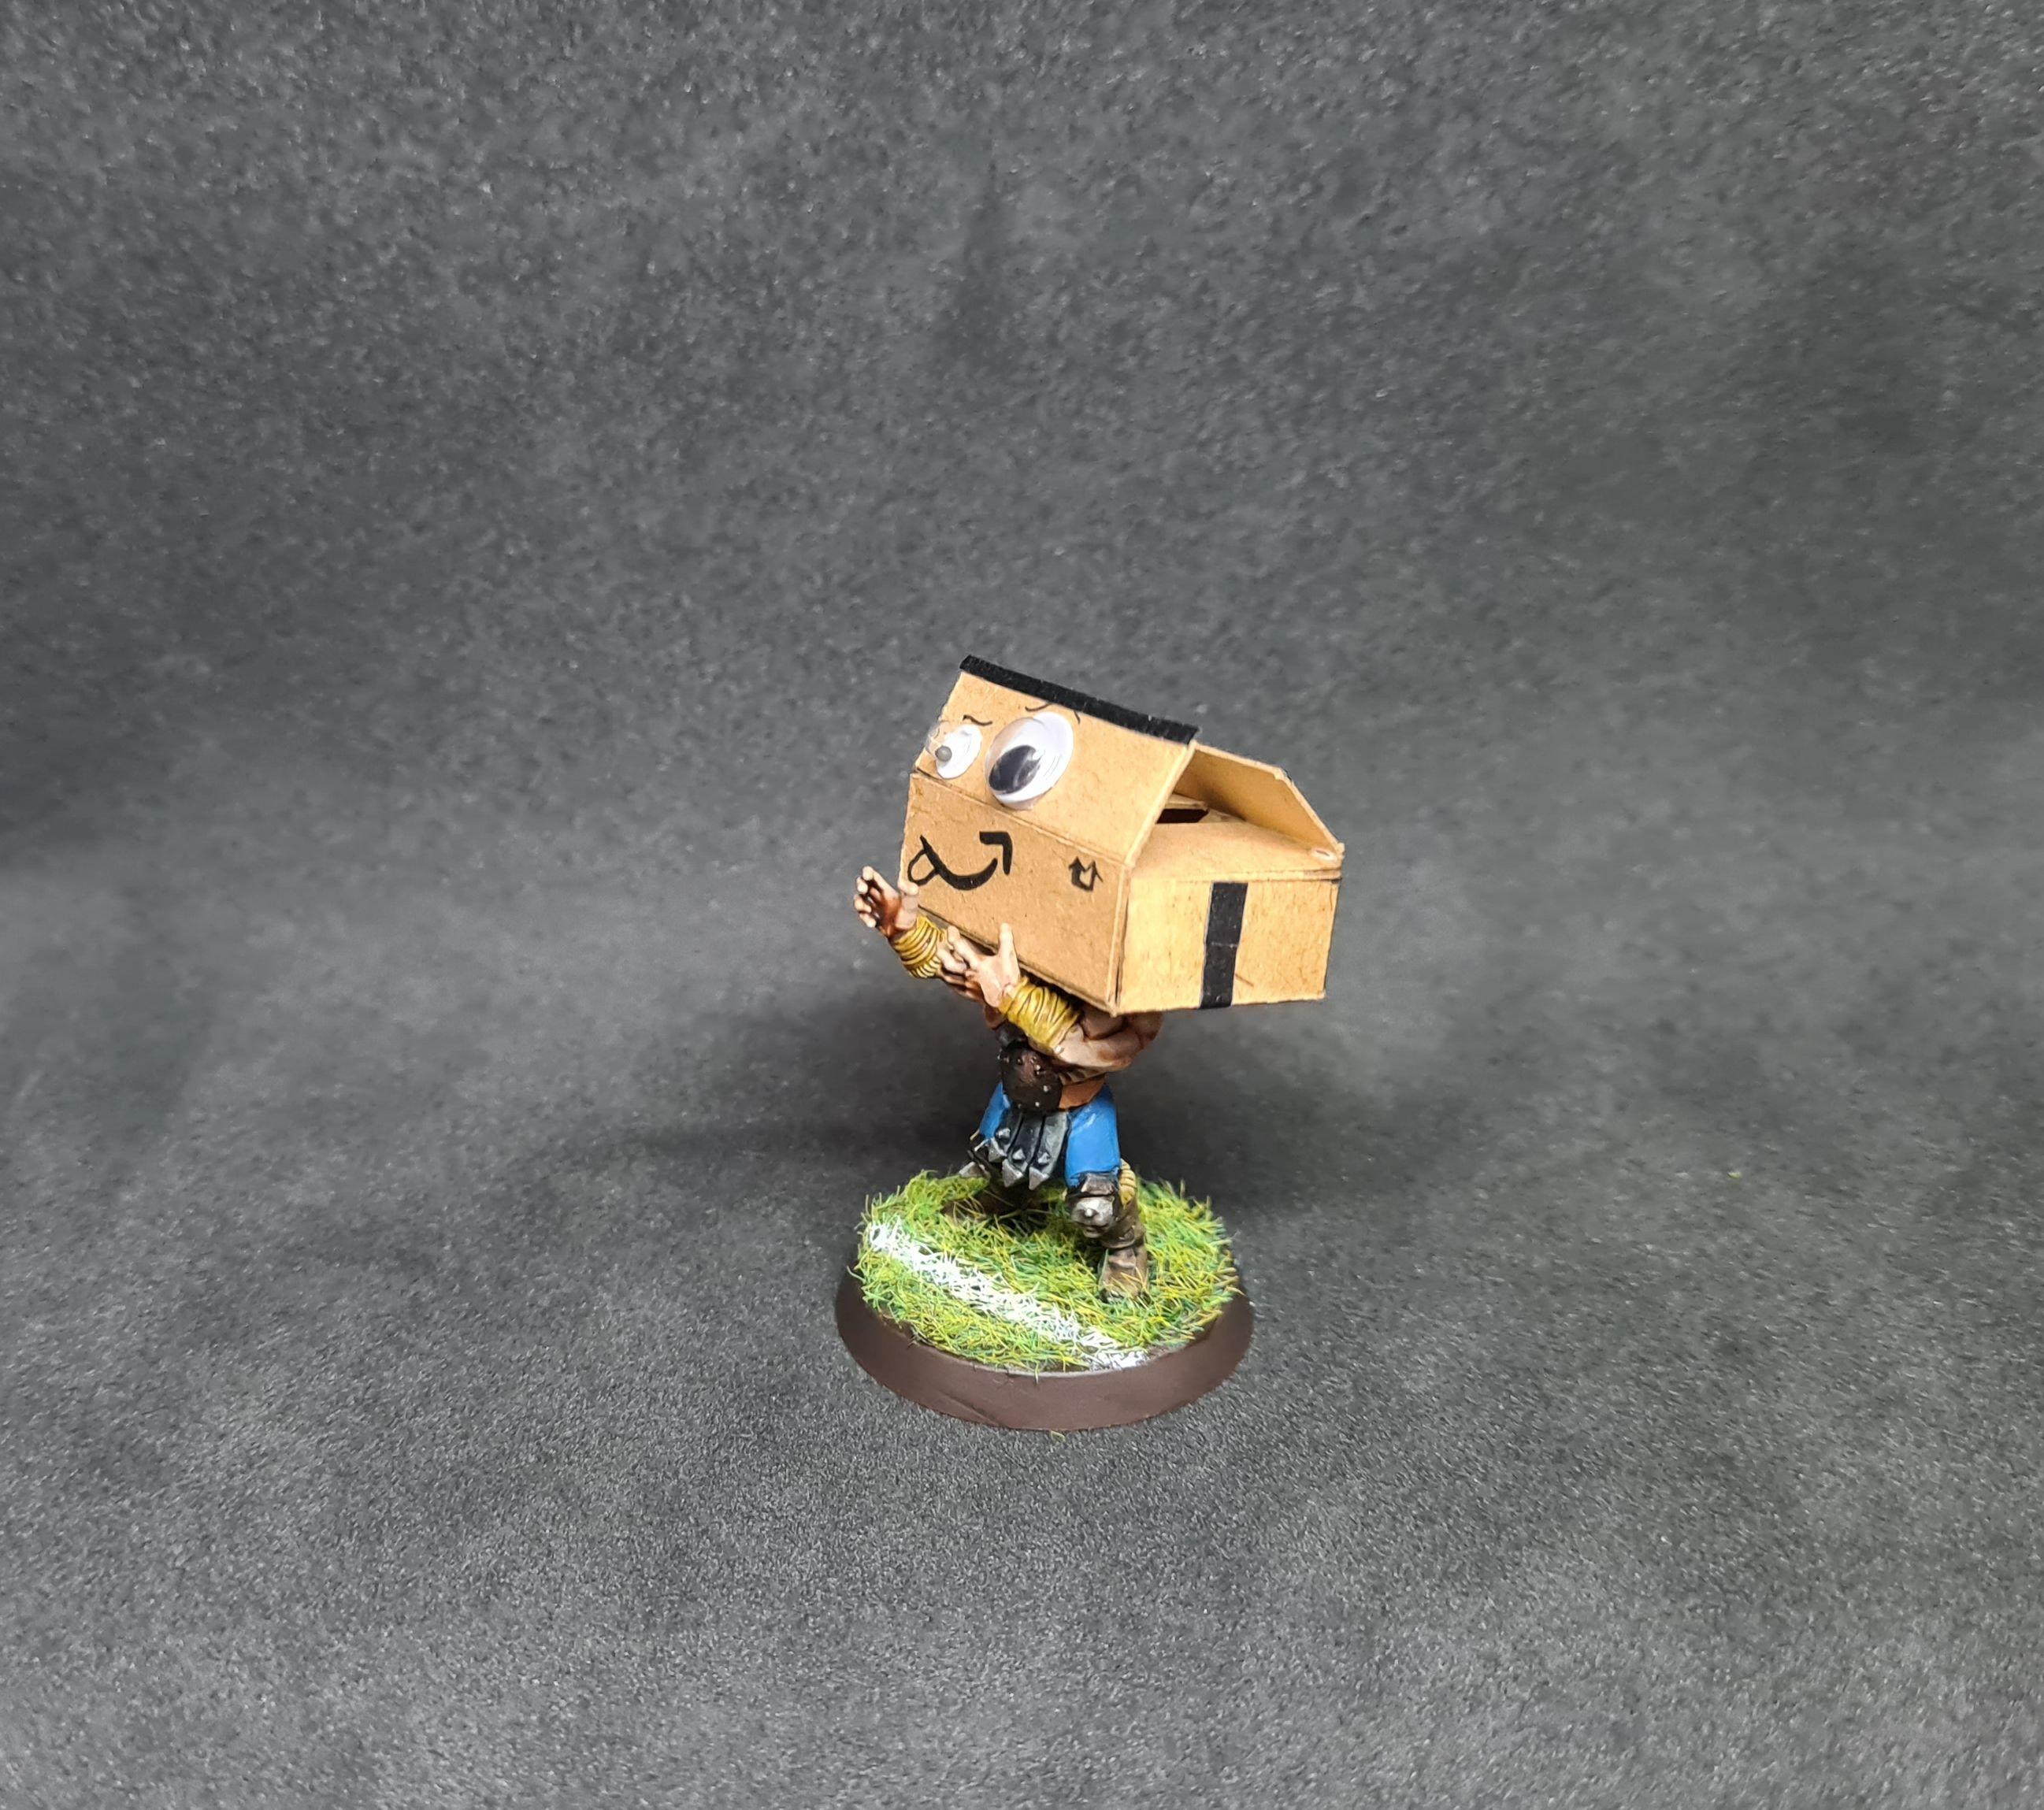 Amazon, Blood Bowl, Silly